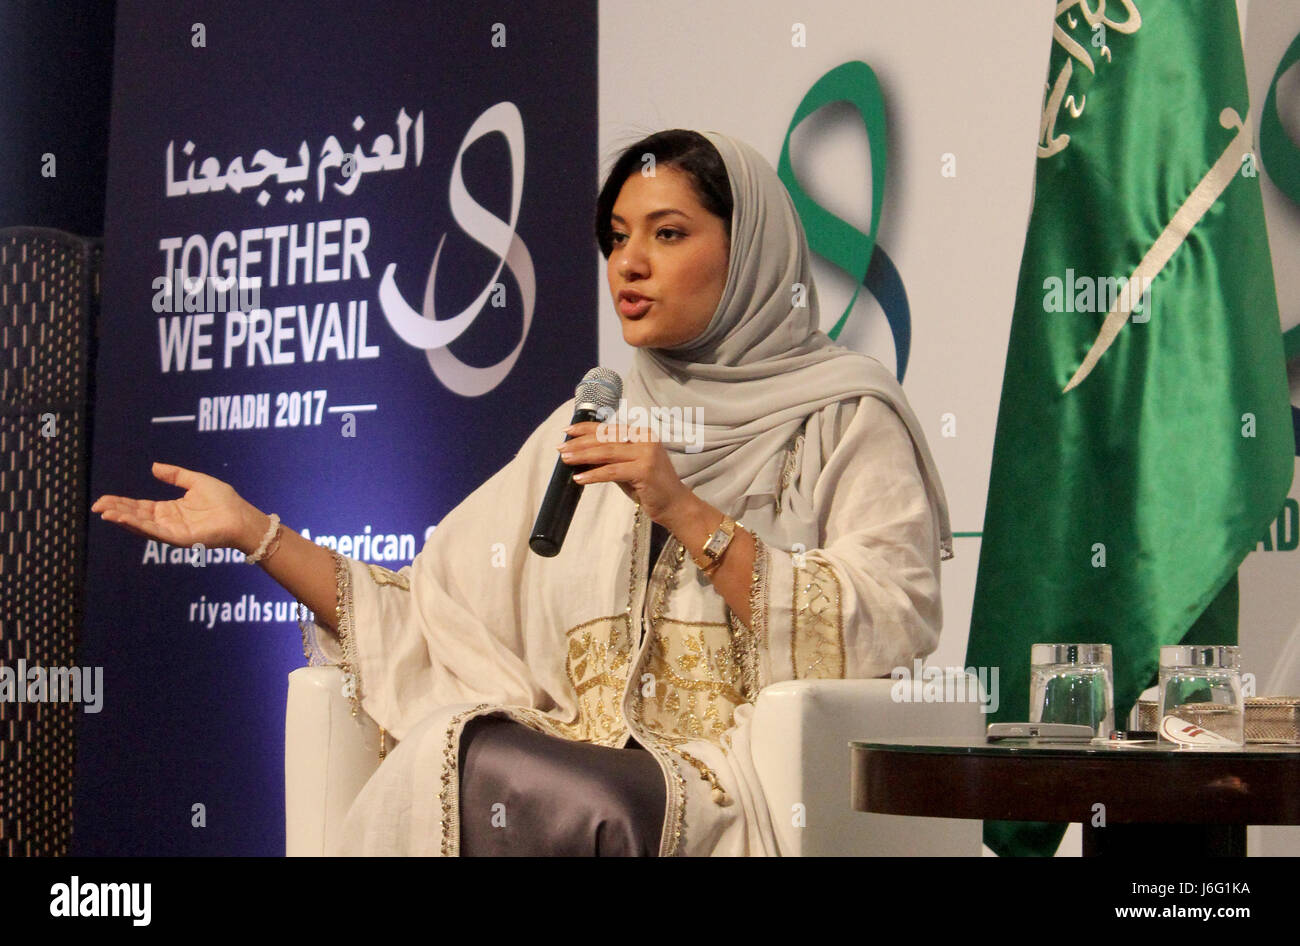 Riyadh, Saudi Arabia. 21st May, 2017. Saudi Arabian Princess Reema bint Bander Al Saud, Vice President for Women's Affairs of the General Sports Authority in Saudi Arabia, speaking on the sidelines of a two-day visit by US President Trump in Riyadh, Saudi Arabia, 21 May 2017. Princess Reema bint Bander Al Saud hosted a roundtable with 15 Saudi women and Ivanka Trump. Photo: Nehal El-Sherif/dpa/Alamy Live News Stock Photo